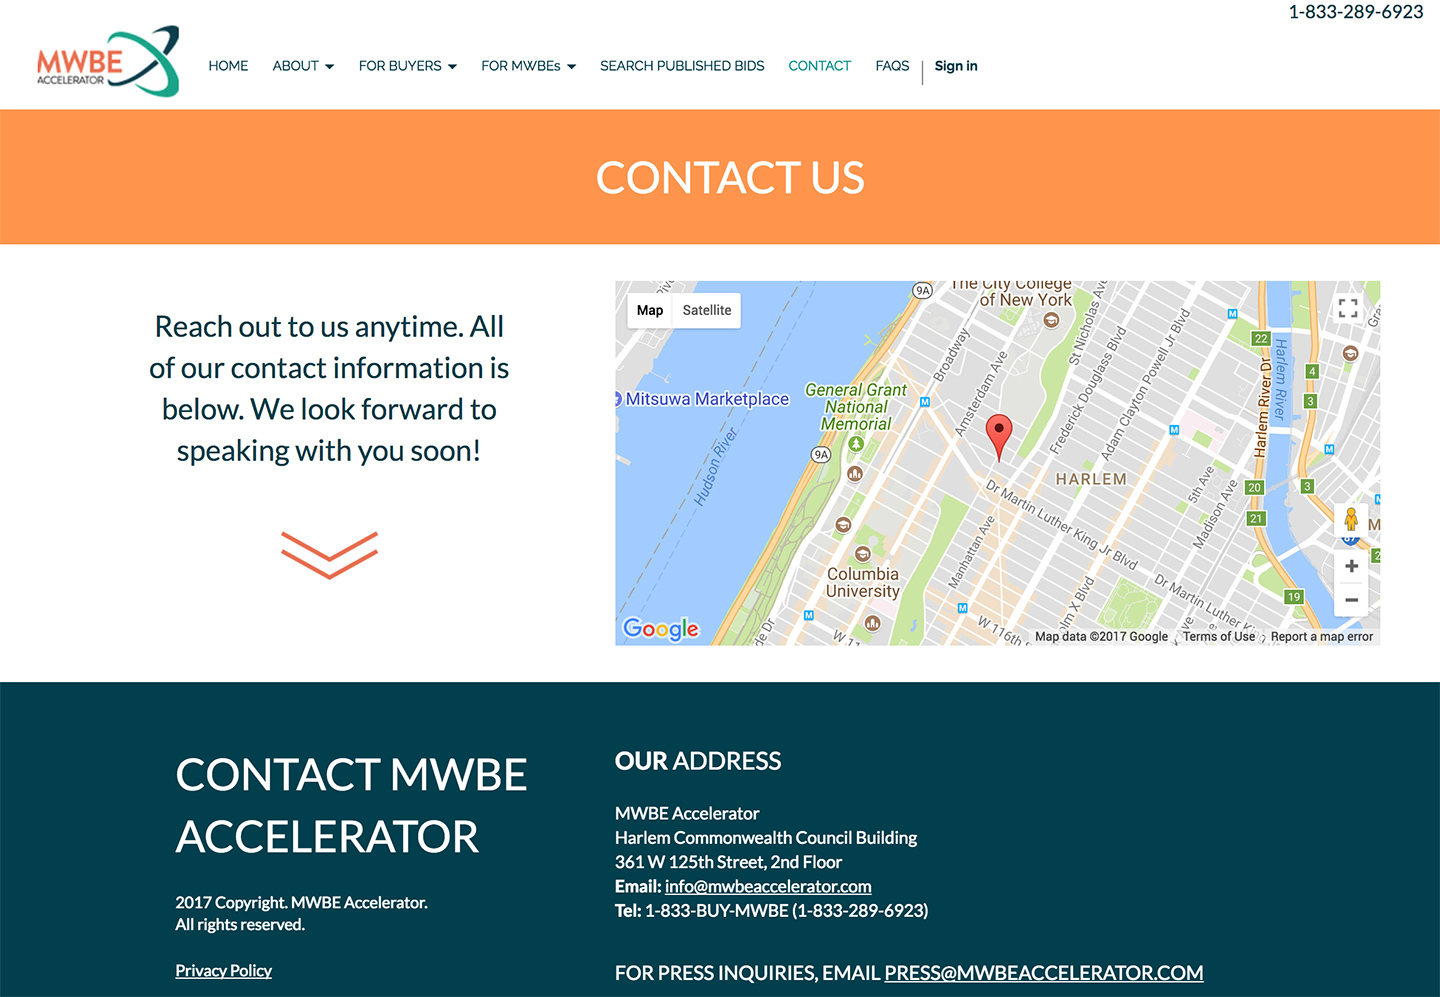 MWBE Accelerator: Embedded Map